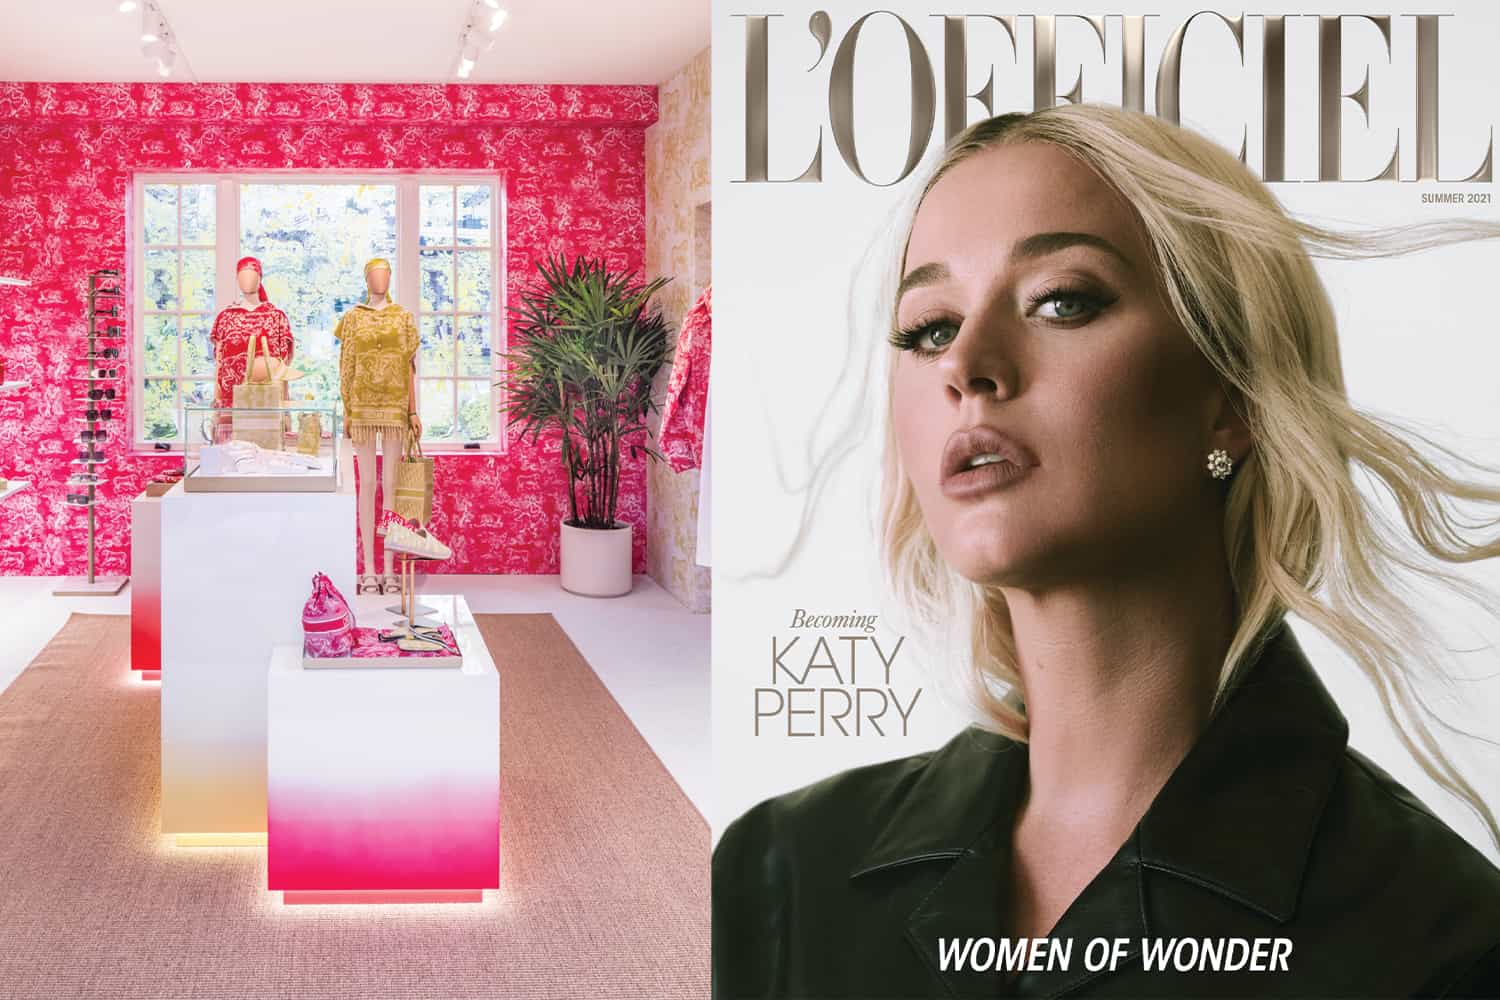 Daily News: Katy Perry's Mom Life, Dior's New Pop-Up, And More!